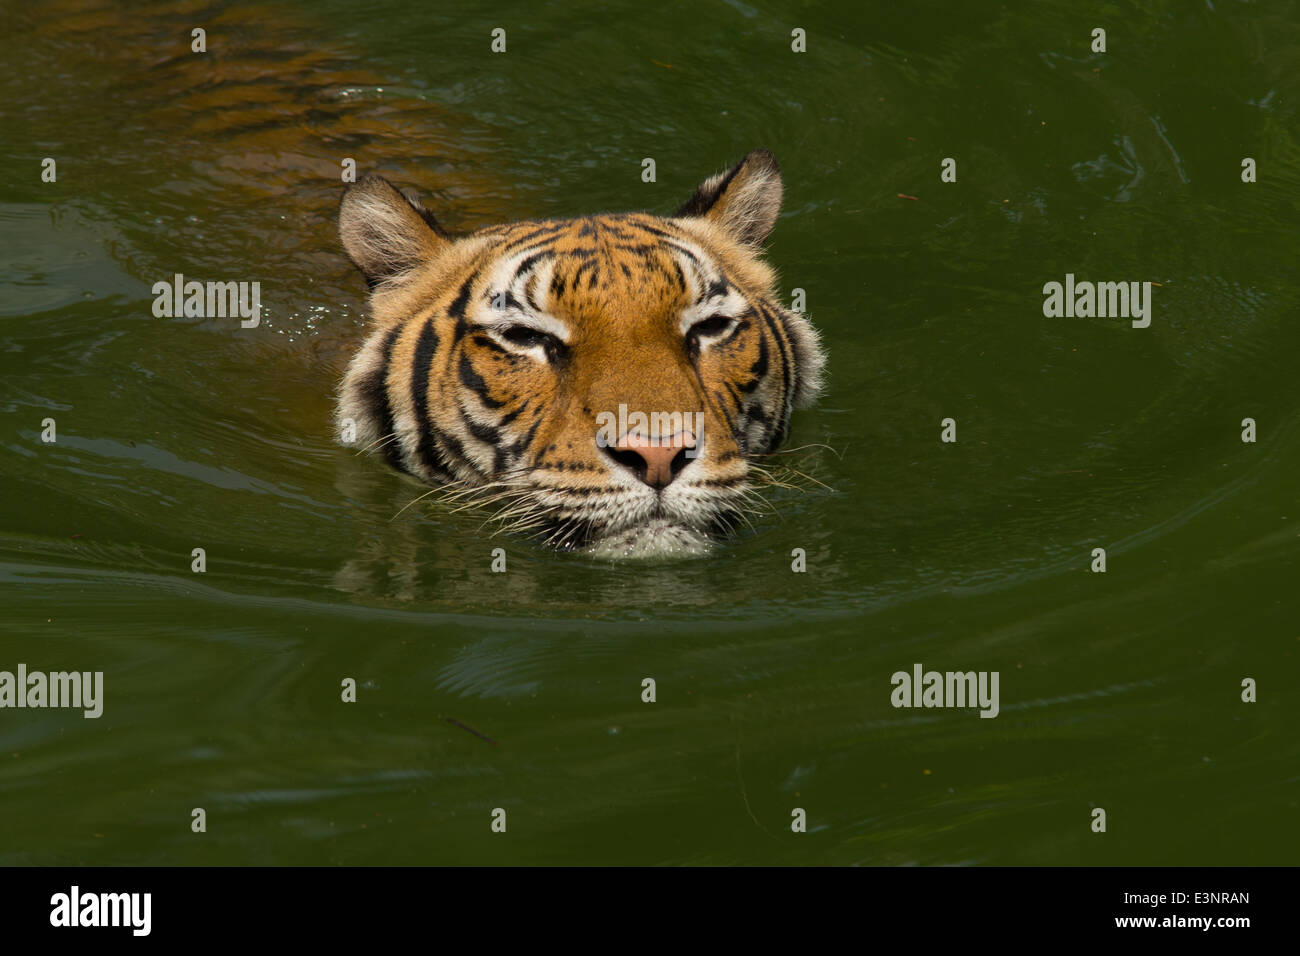 A Tiger swimming in the water / TIger swim / Tiger bathing / Tiger Stock Photo